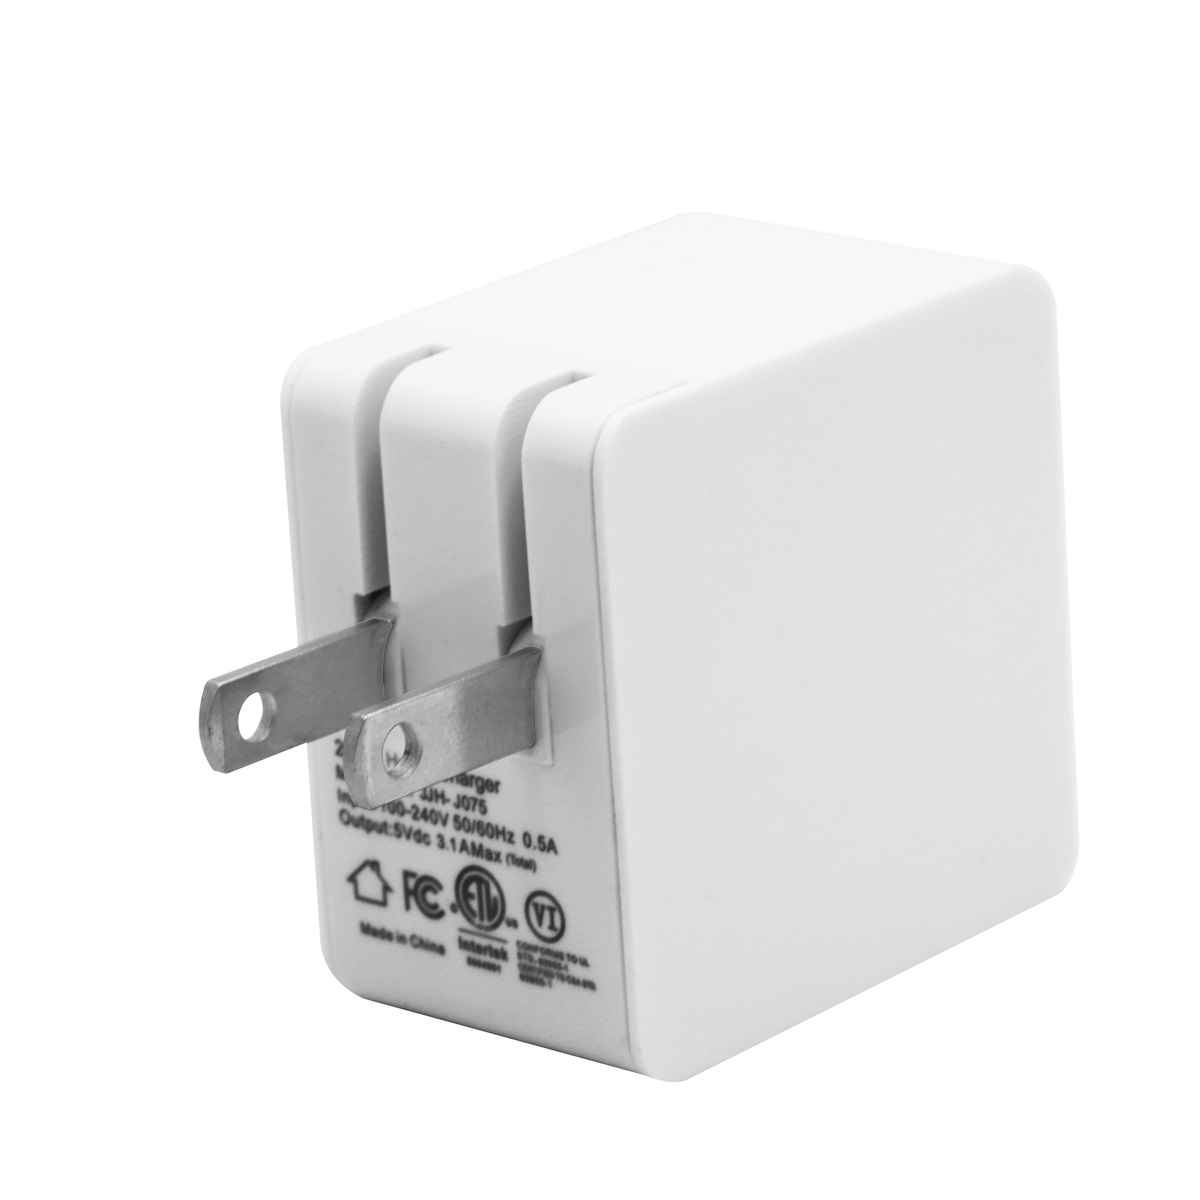 2. LM-J075 3.1A USB-A and Type-C Wall Charger Bulk Purchase and Corporate purchase from China Union Power -Description-